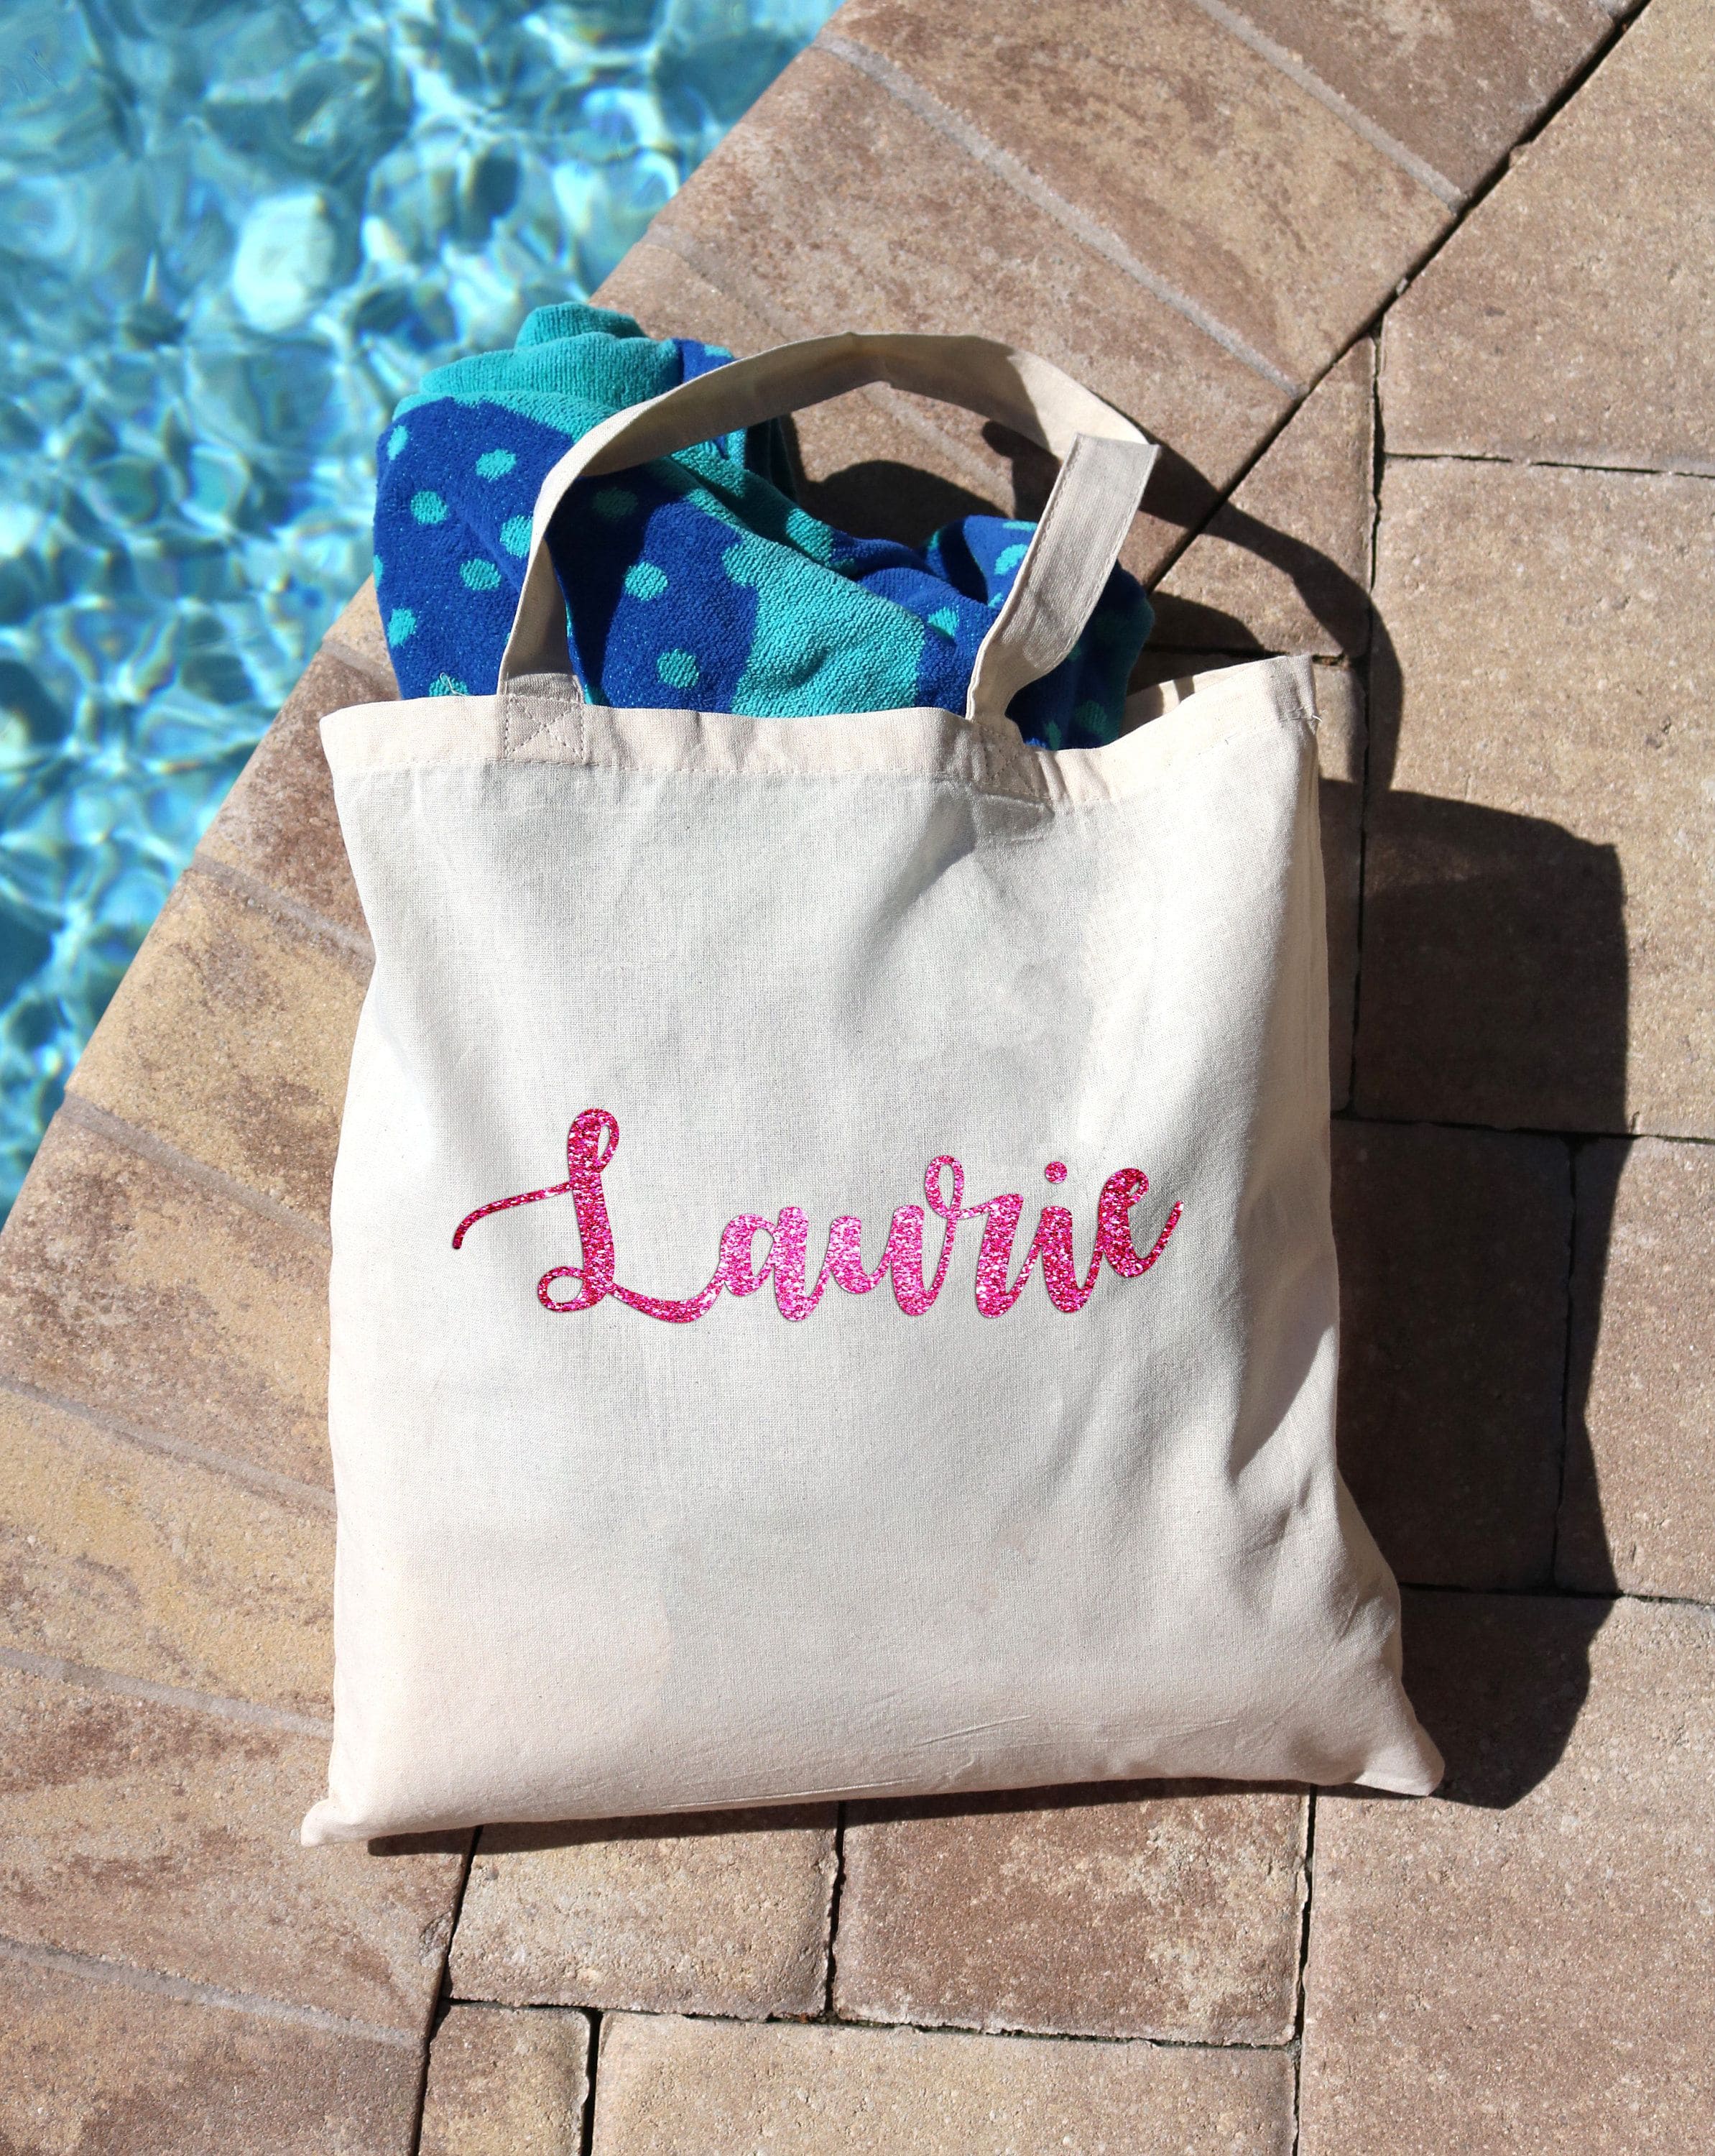 Unique Branded Tote Bags - Instant Attention-Grabber